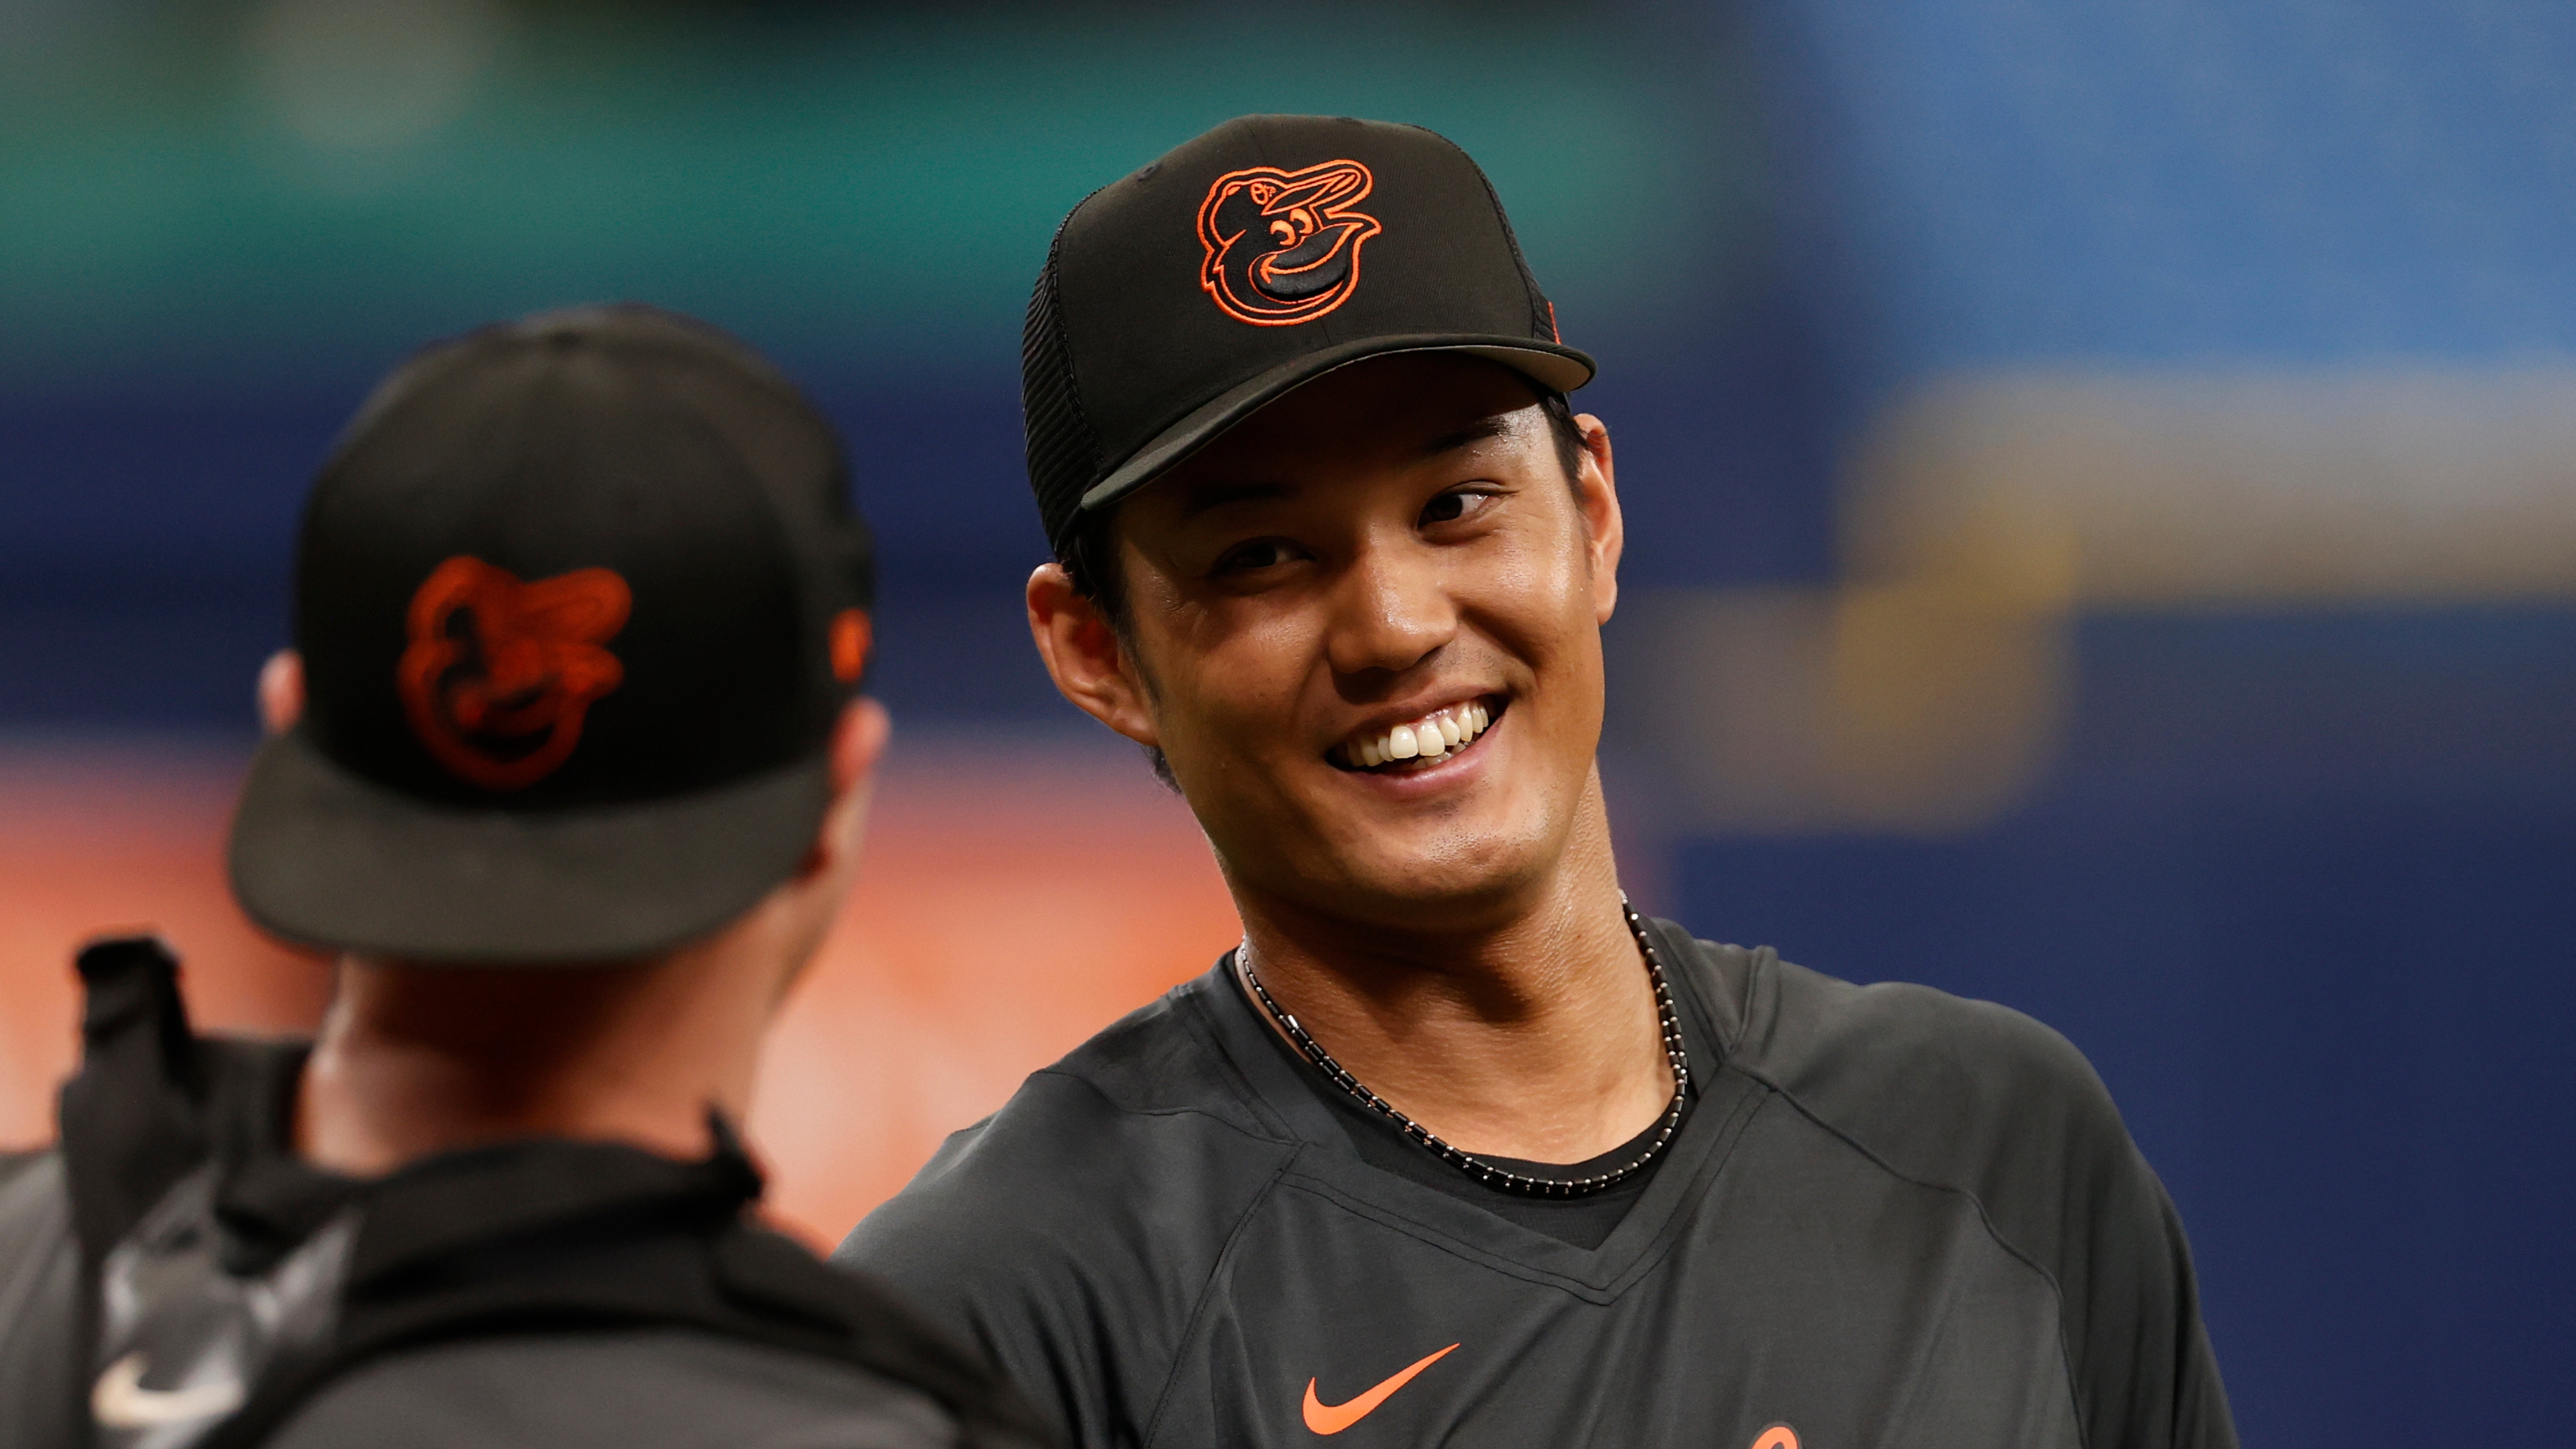 Shintaro Fujinami joins first-place Orioles after trade: 'I'll do